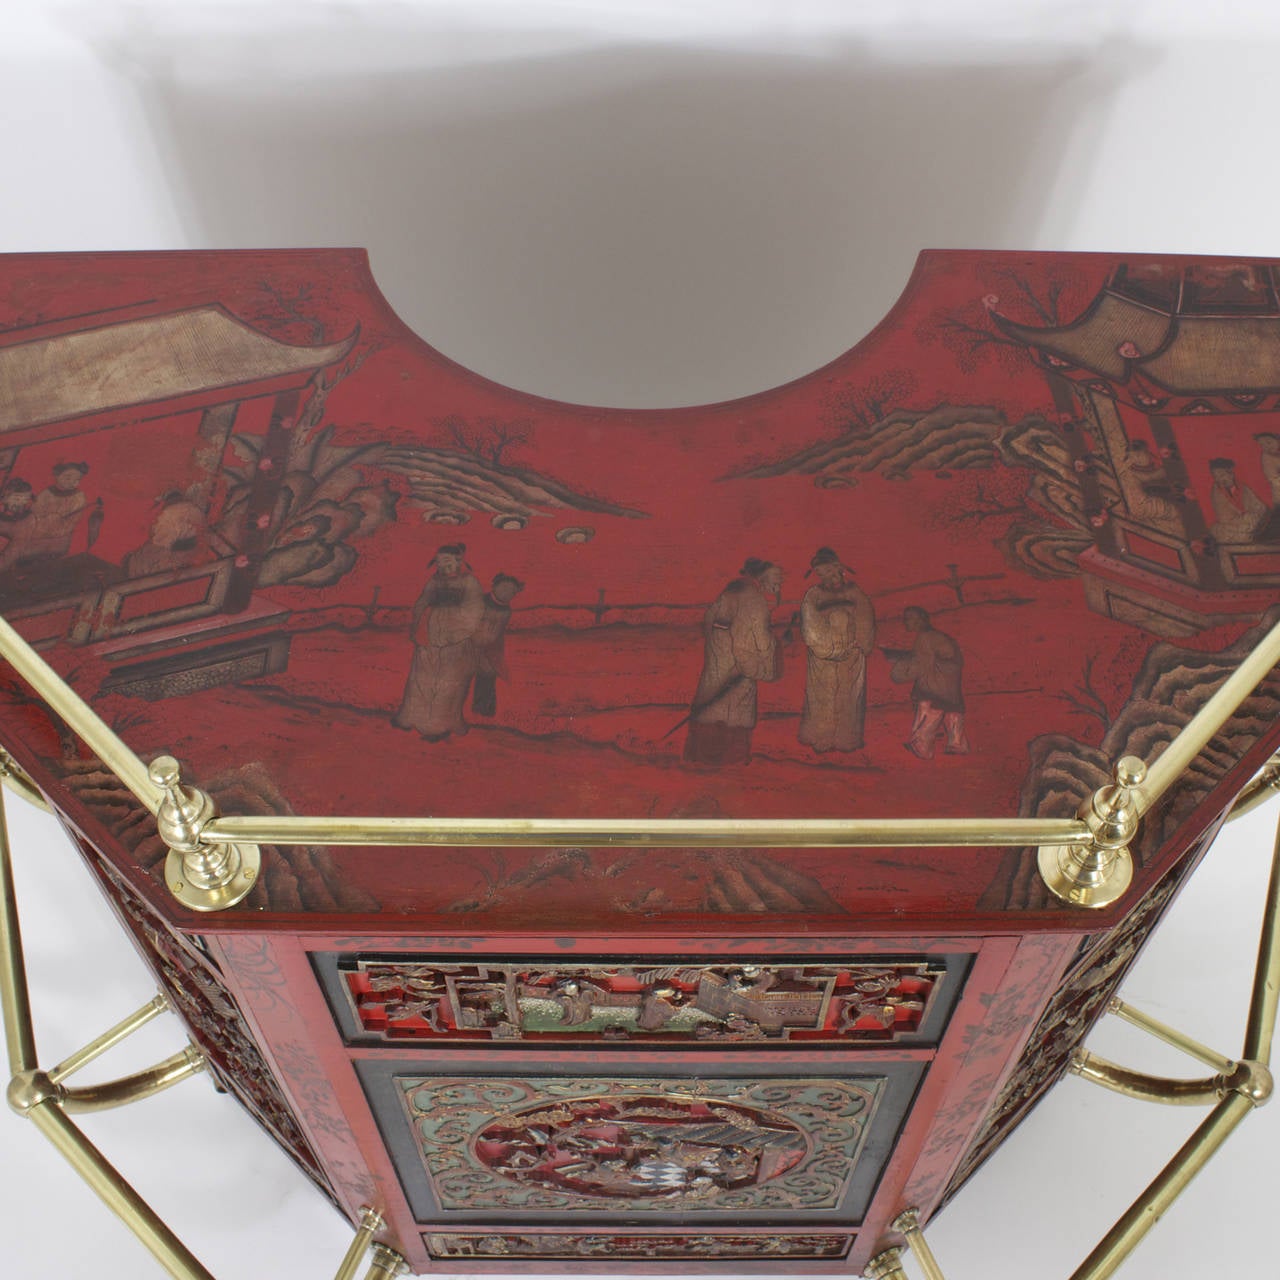 Over the top early to mid 20th C. carved wood and lacquer Chinese stand up or dry bar, in cinnabar red, with a Chinoiserie painted top and paneled with well carved scenes of the forbidden city, highlighted in gilt, and featuring some very serious